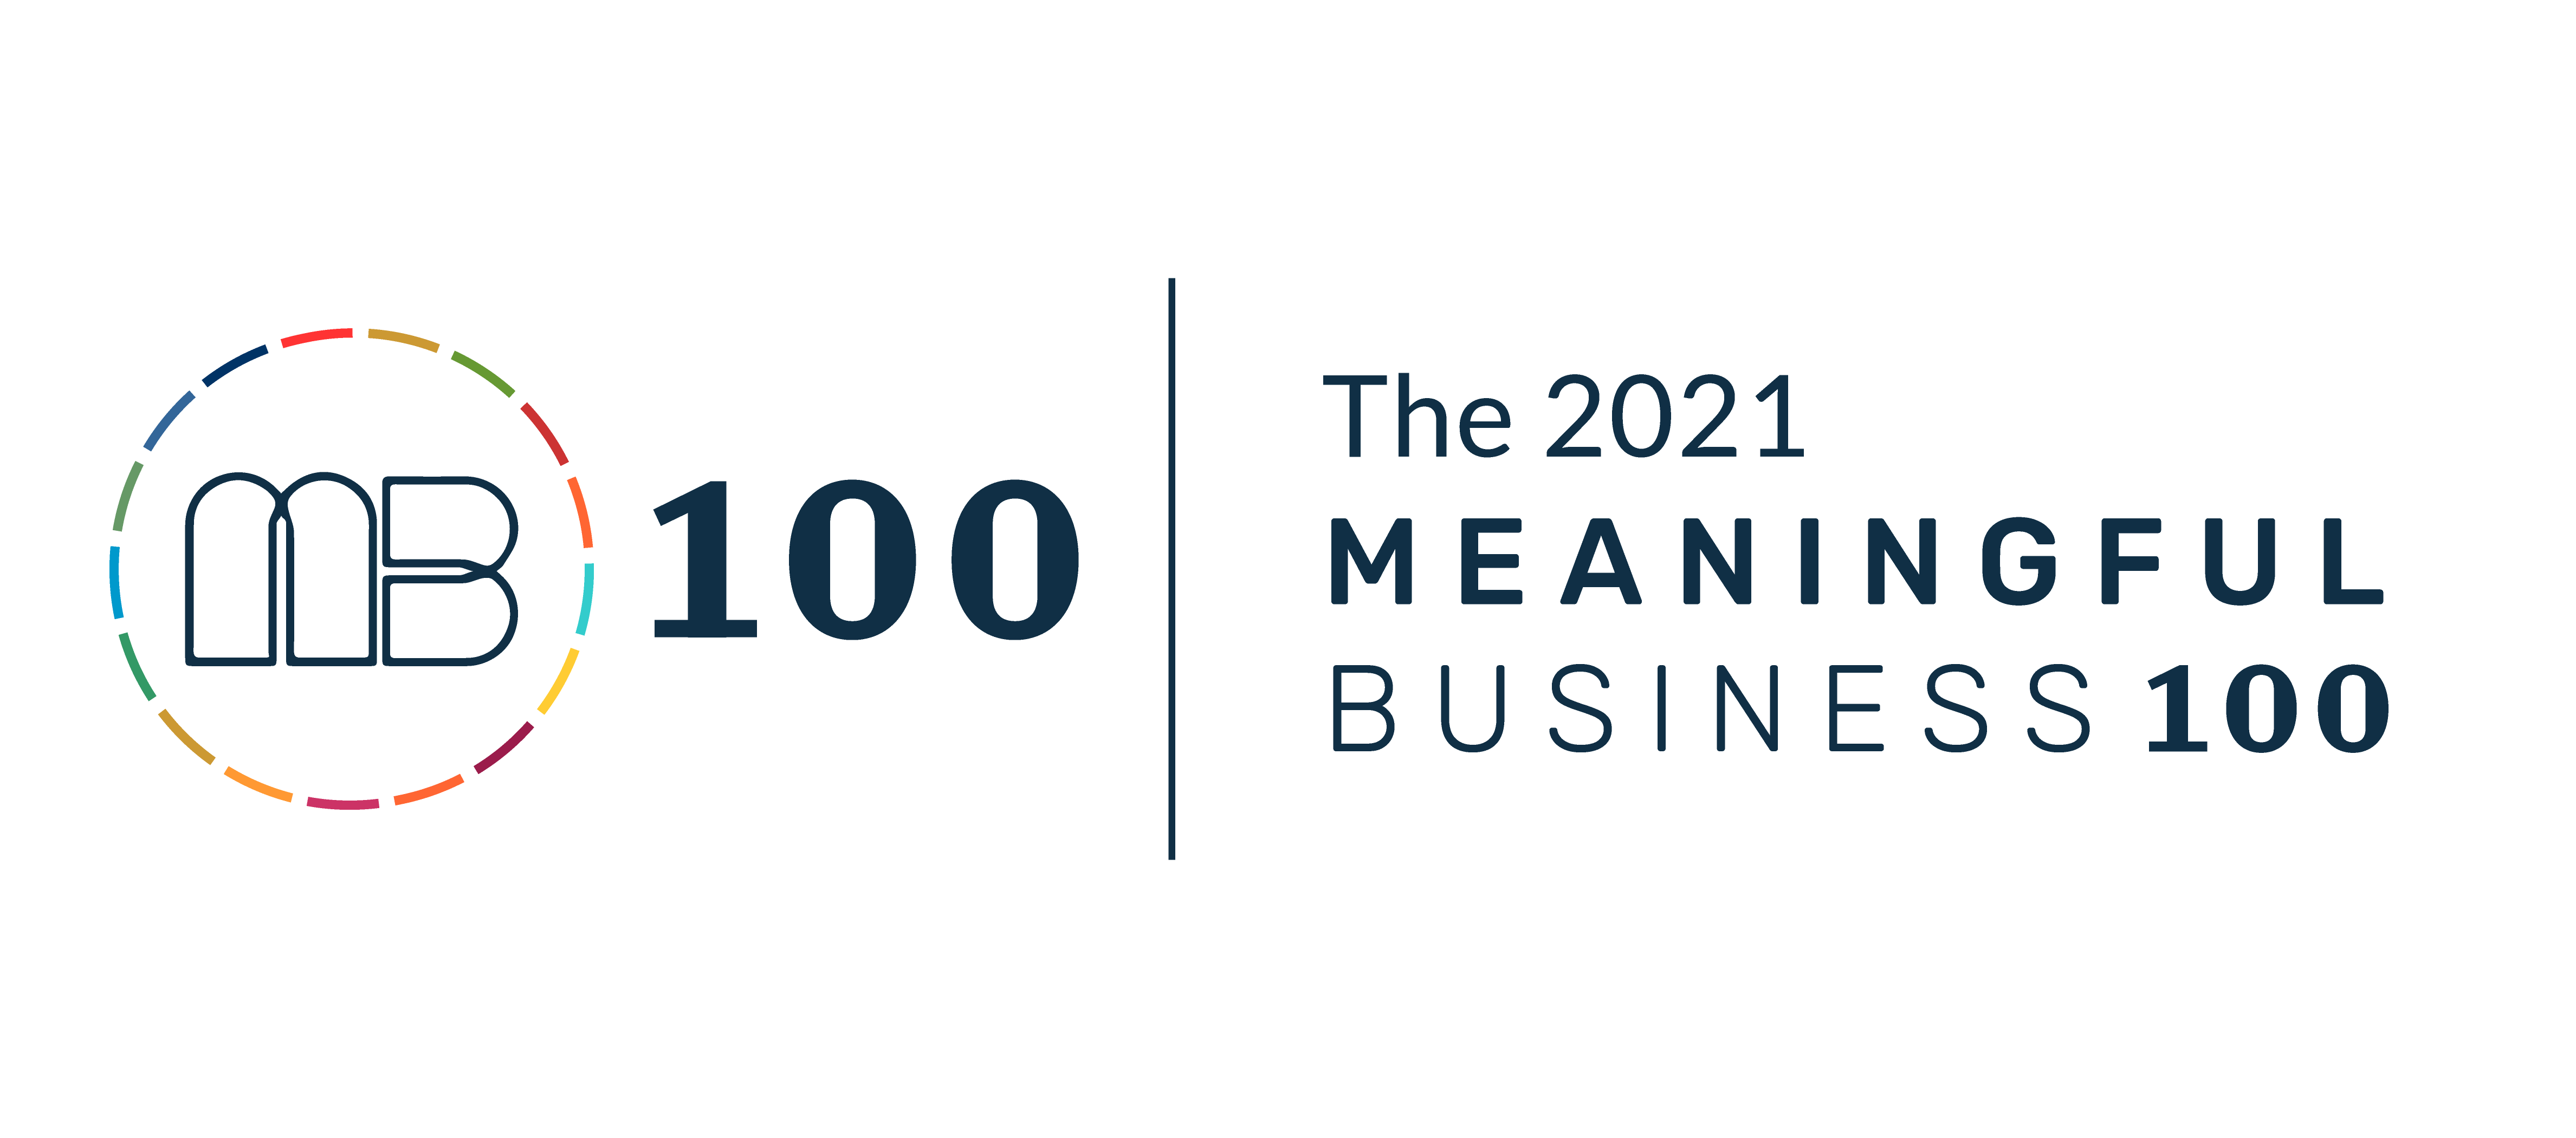 Meaninful Business - 2021